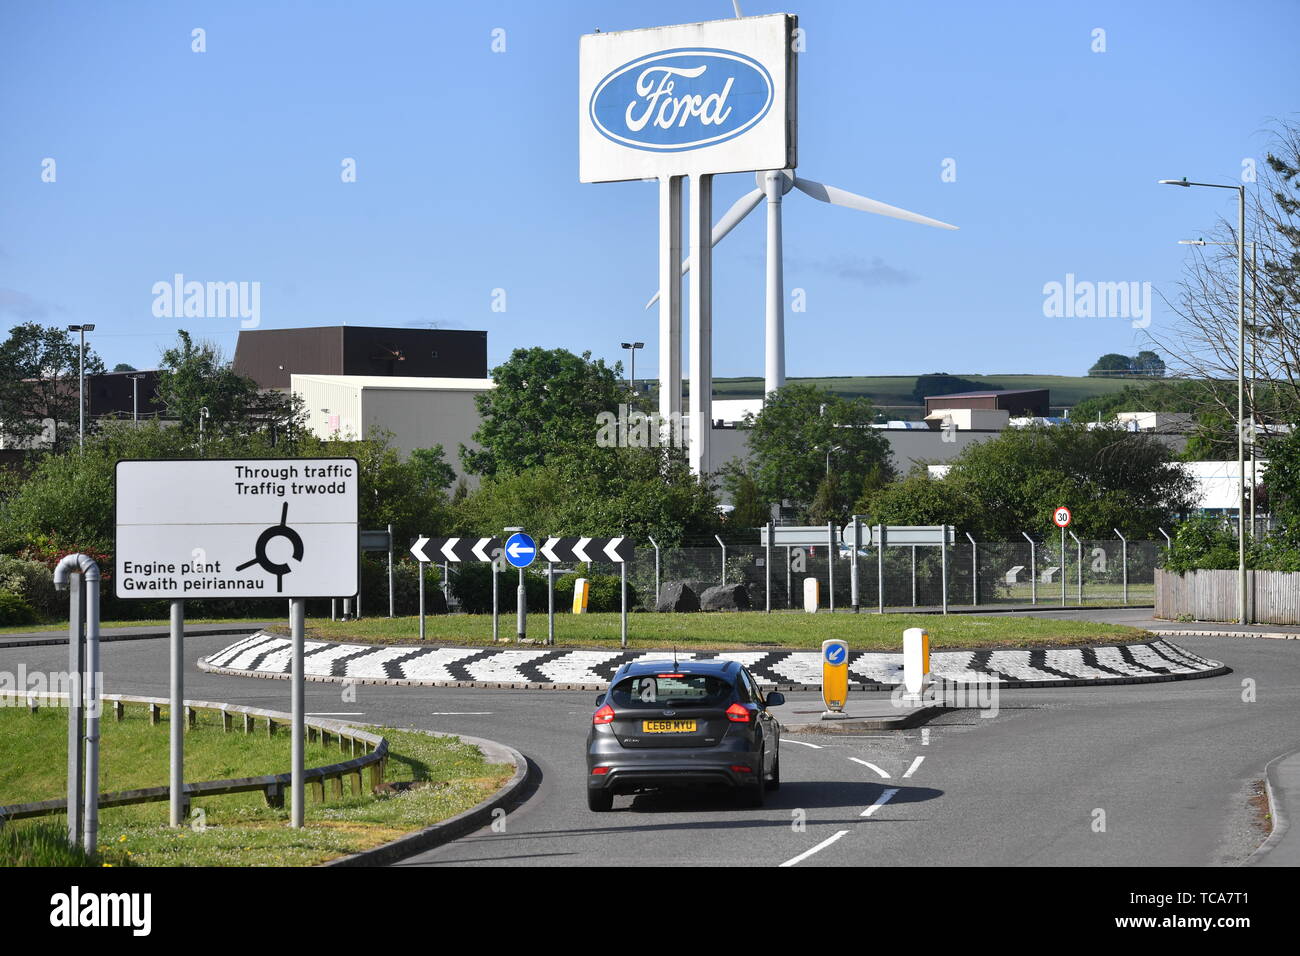 The Ford engine plant near Bridgend, south Wales, where around 1,500 jobs are affected, as unions have expressed shock at an expected announcement that the car giant is to close one of its UK factories with heavy job losses. Stock Photo